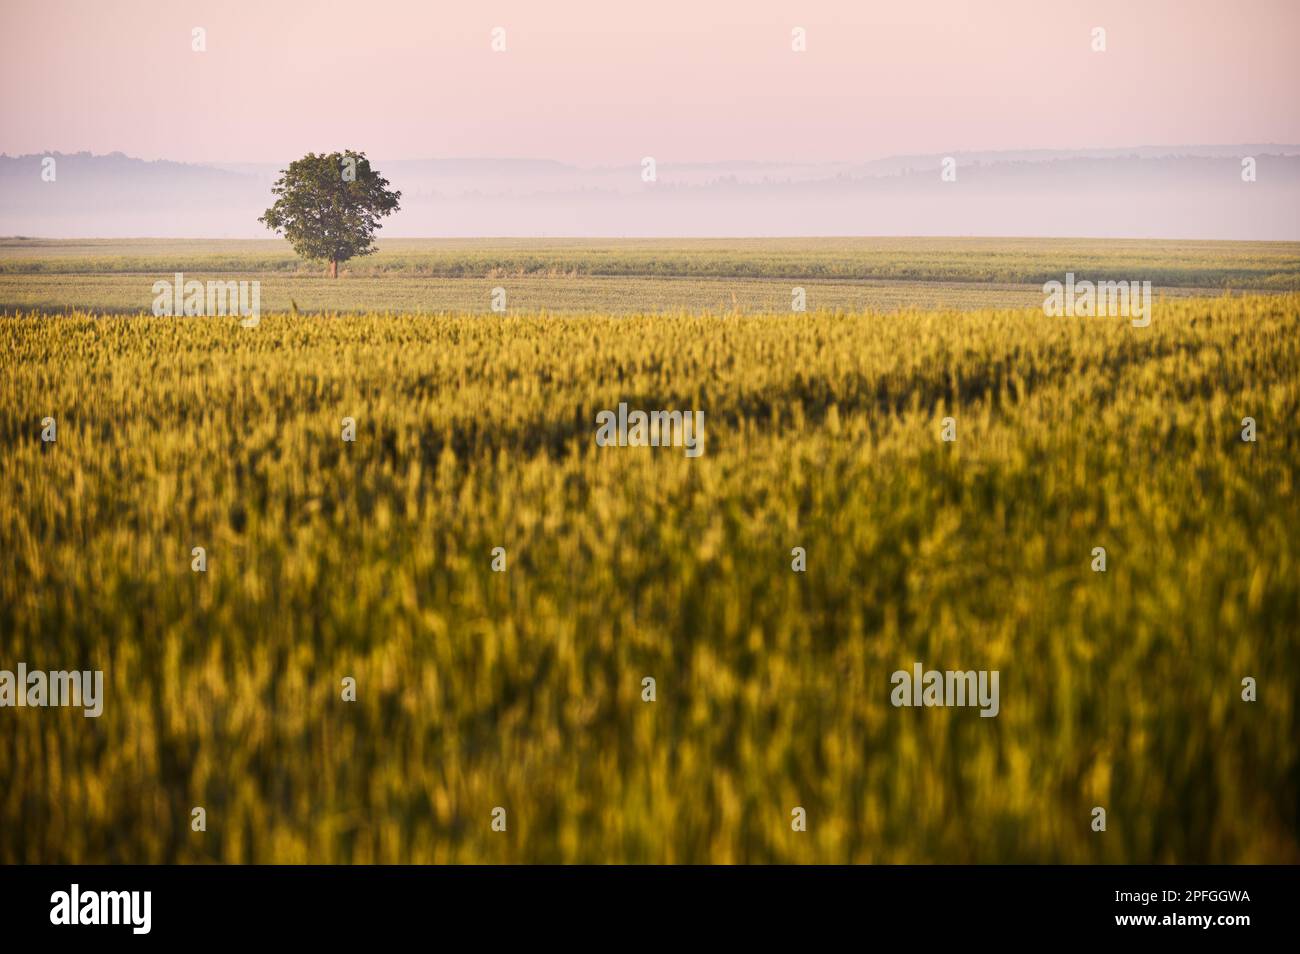 A lonely tree in a barley field at sunrise Stock Photo